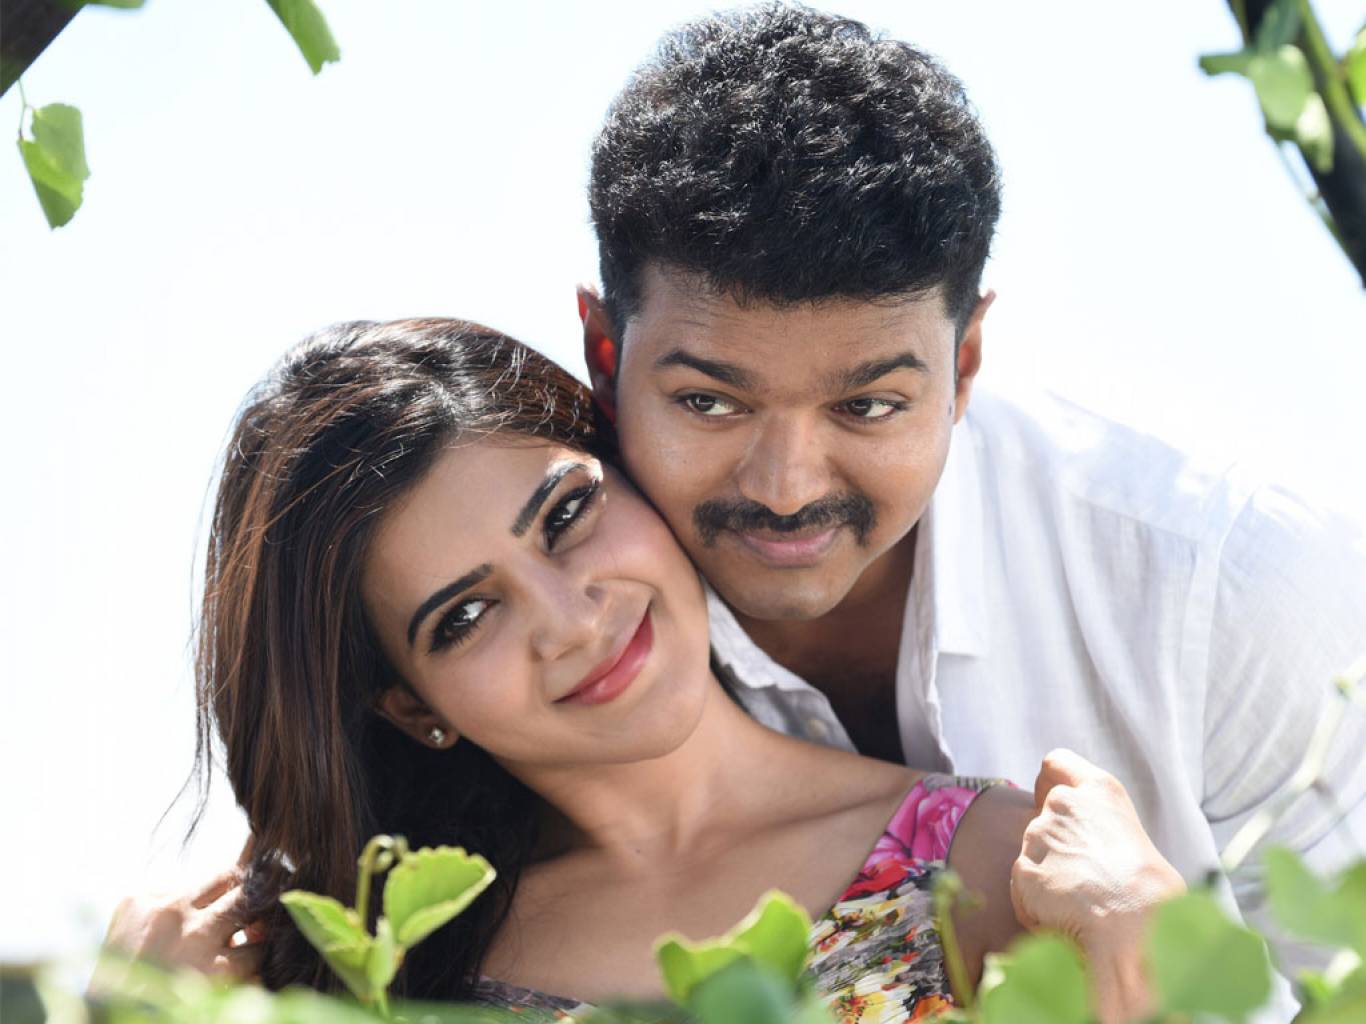 Theri Movie Wallpapers - Top Free Theri Movie Backgrounds ...